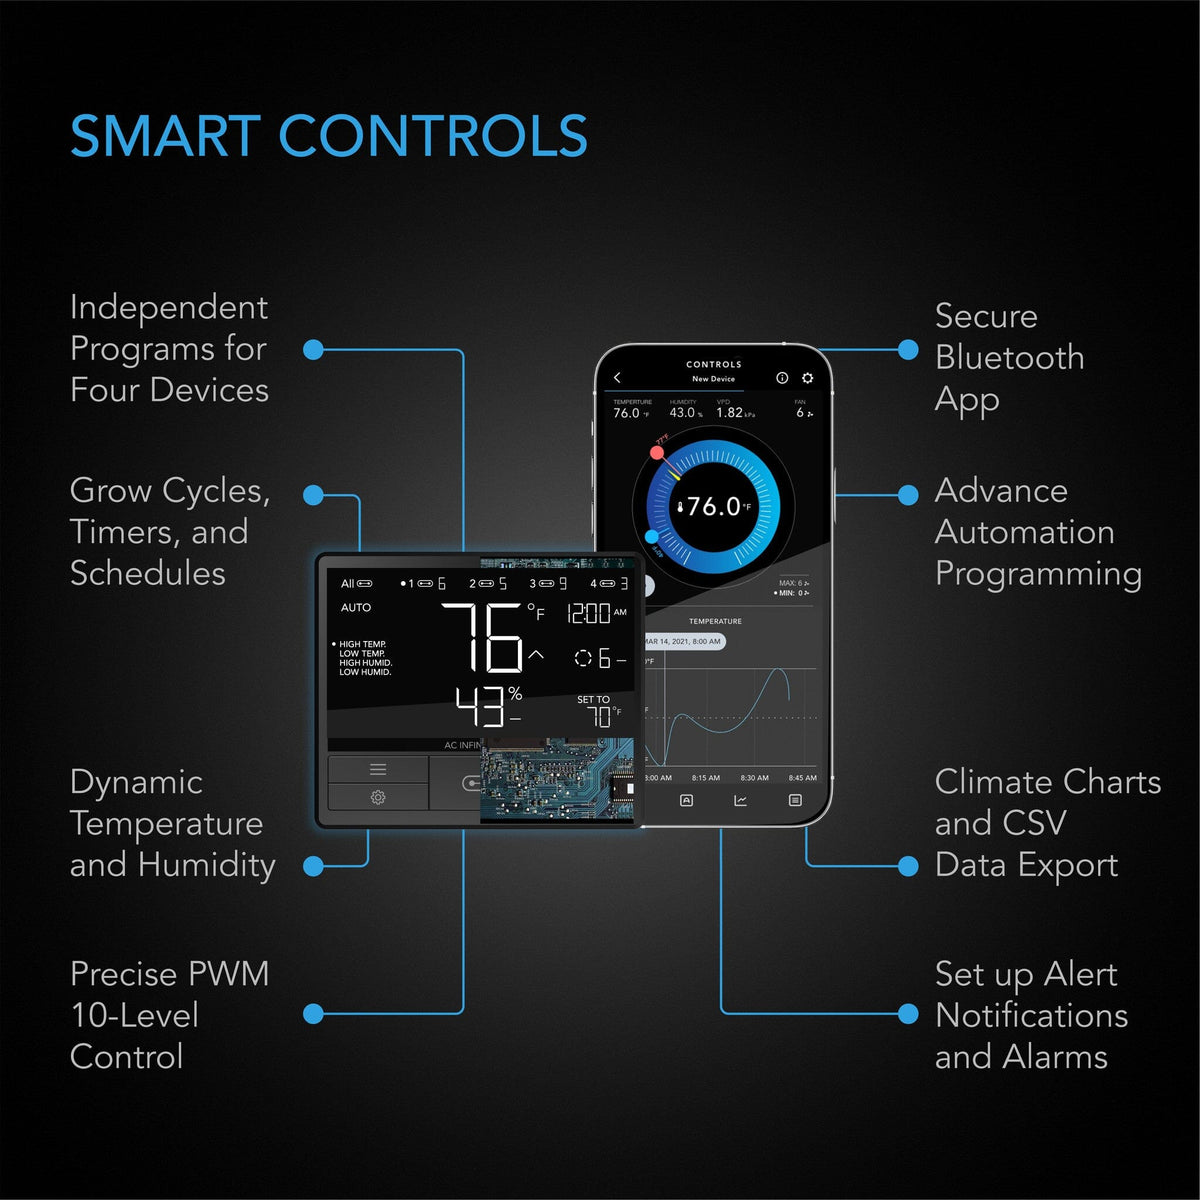 Smart controls with wifi and bluetooth